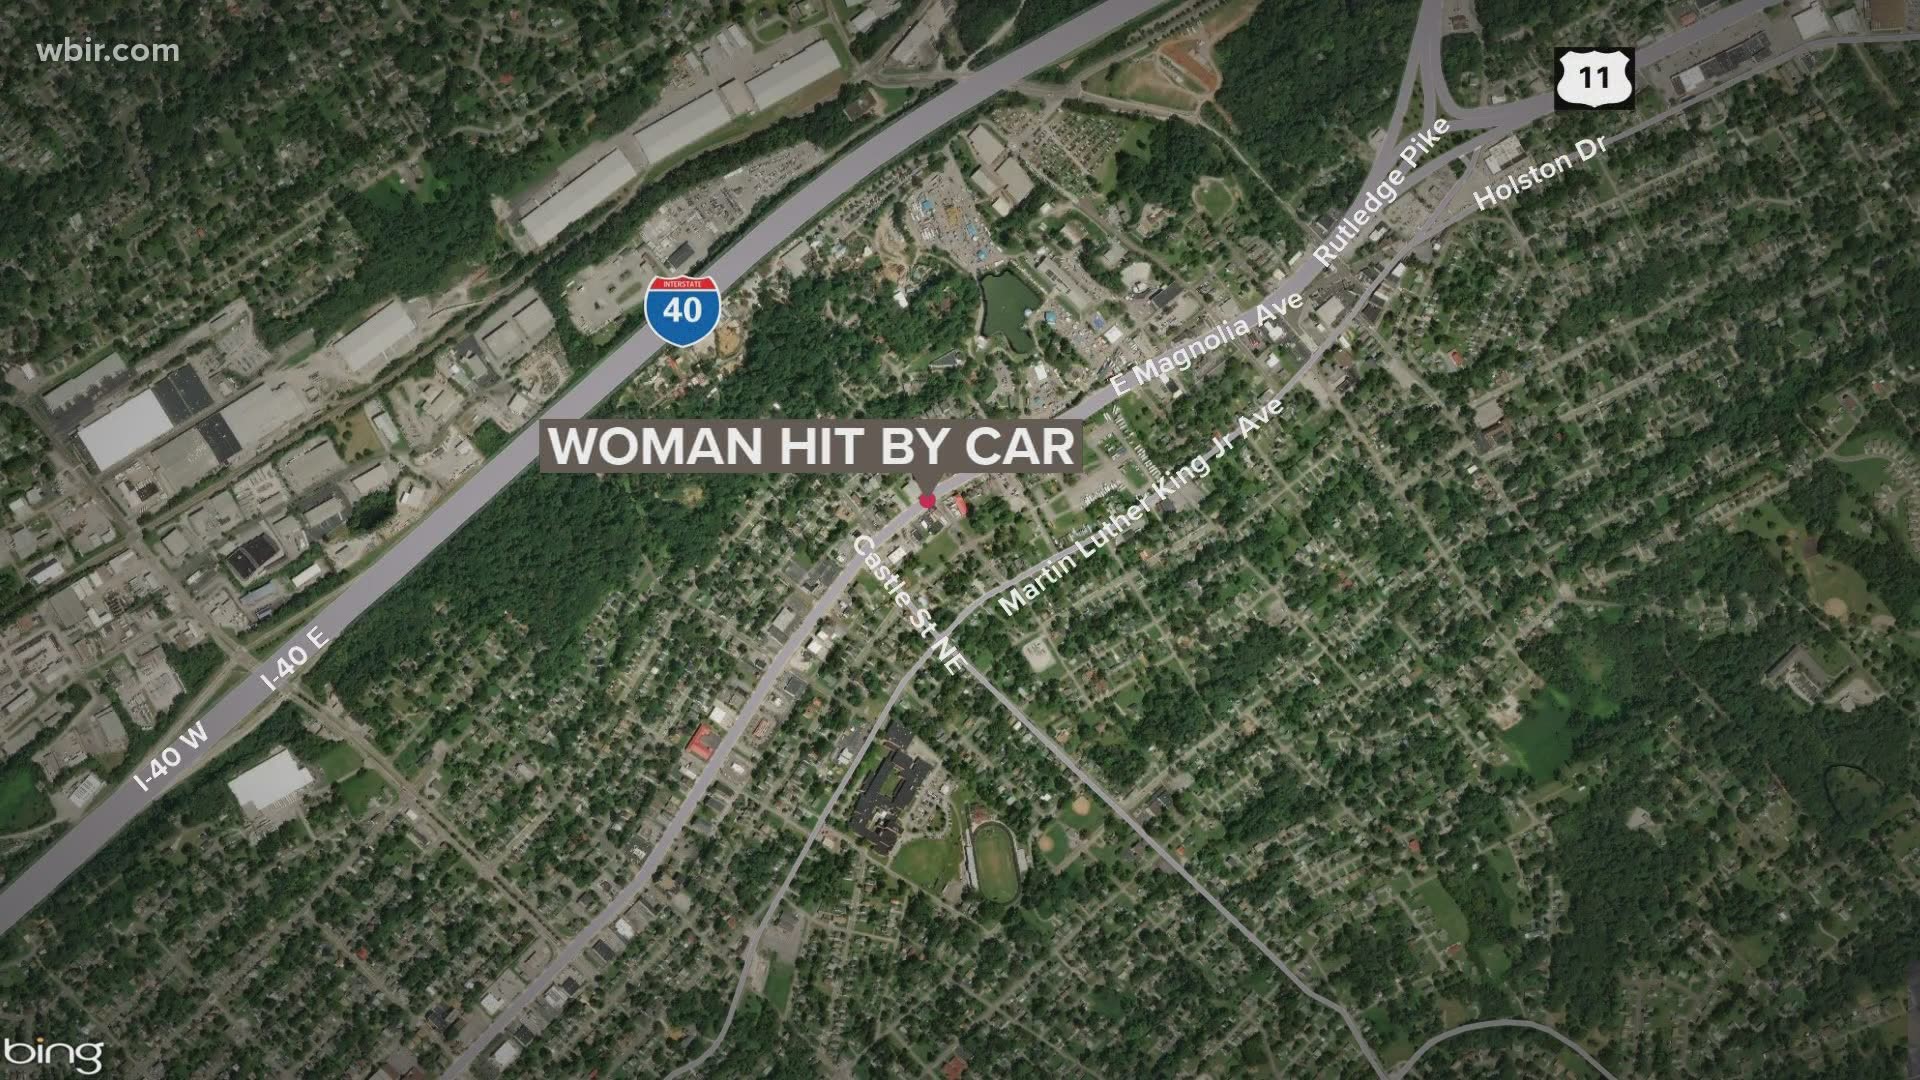 Knoxville police are investigating after a woman died from being hit by a car in East Knoxville.